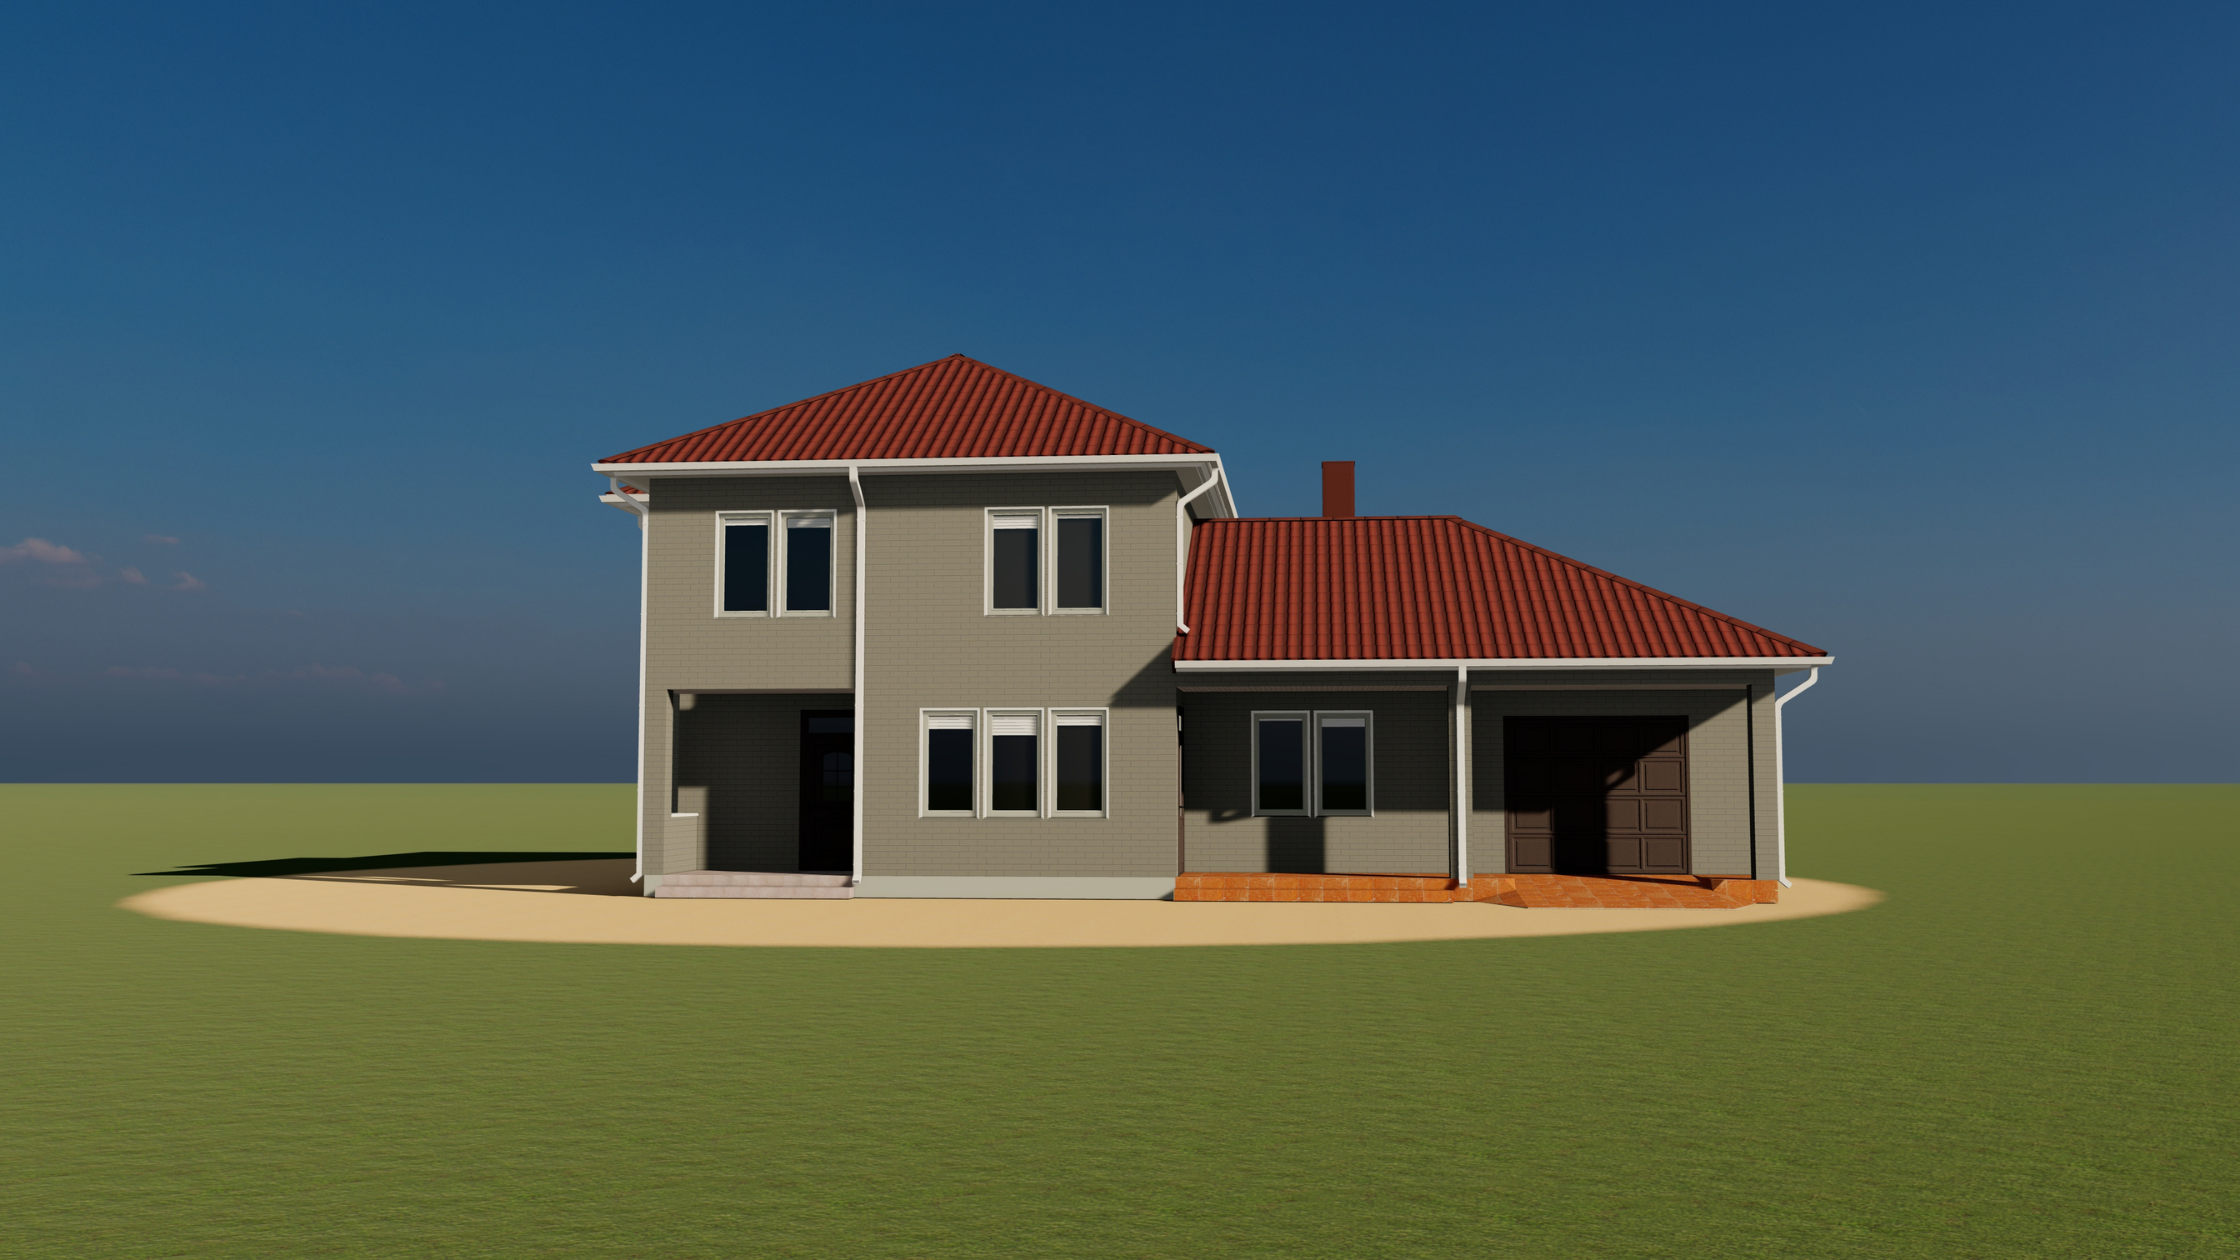 CAD 3D Rendering of a two-story house.